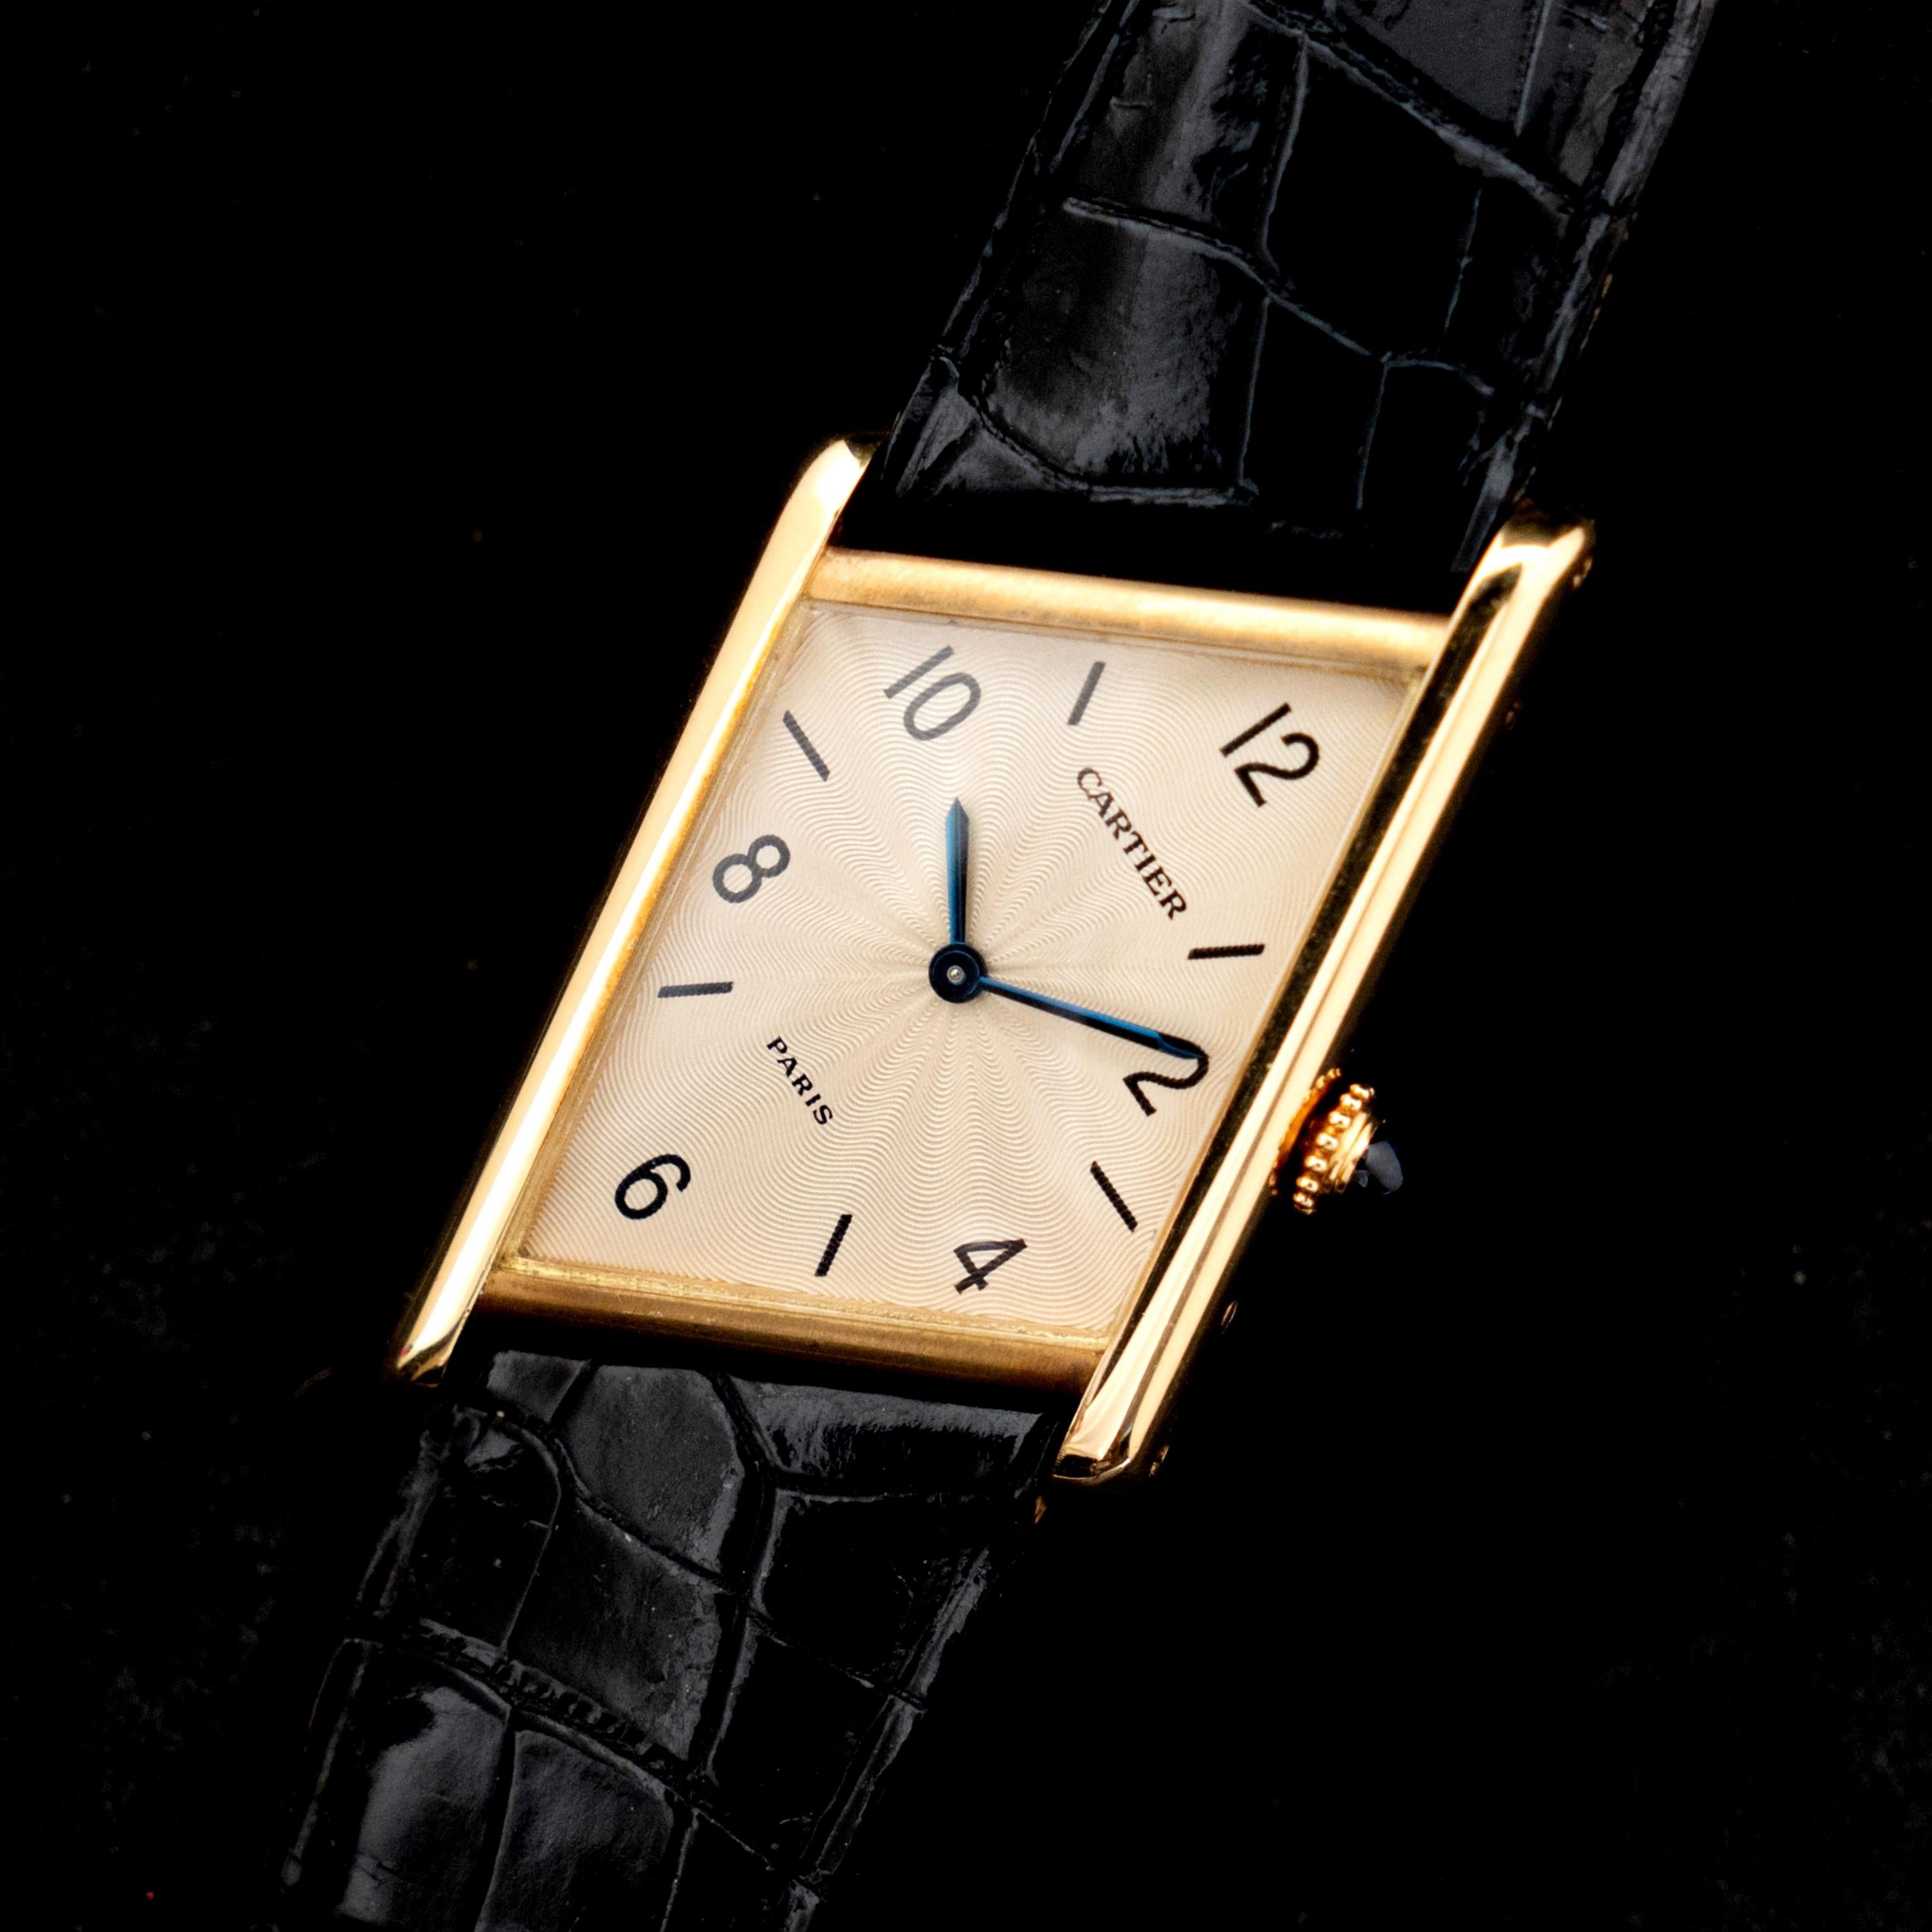 Brand: Cartier
Model: Asymétrique
Year: 1996
Serial number: A11xxxx
Limited: 0xx / 300
Reference: C03884

In 1996, Cartier released a limited edition based on the original “Parallelogram” from 1936. Always staying true to its core values, Cartier